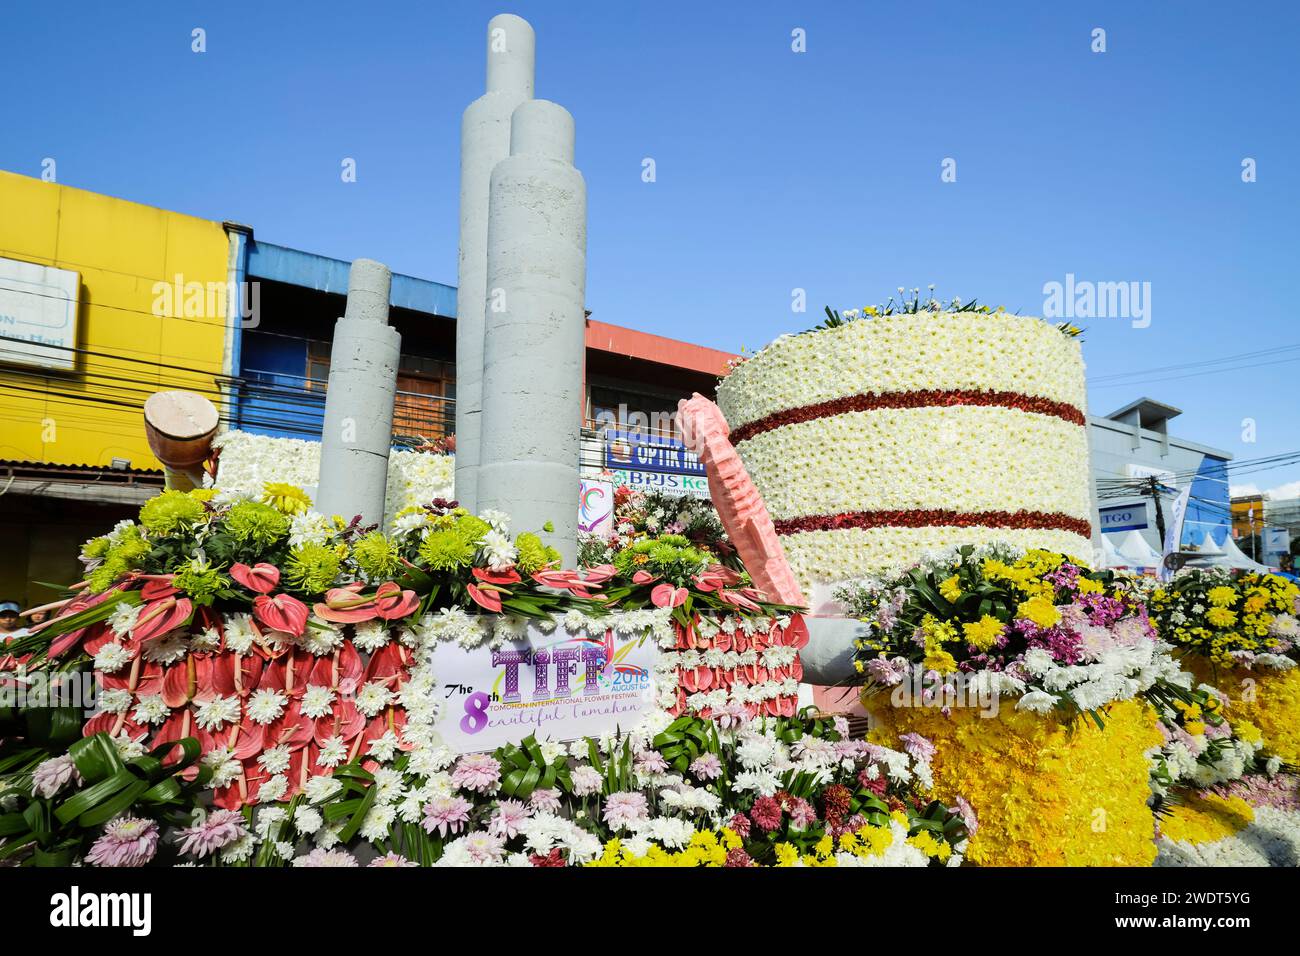 Float of Pertamina, the national energy company, at the annual Tomohon International Flower Festival parade Stock Photo